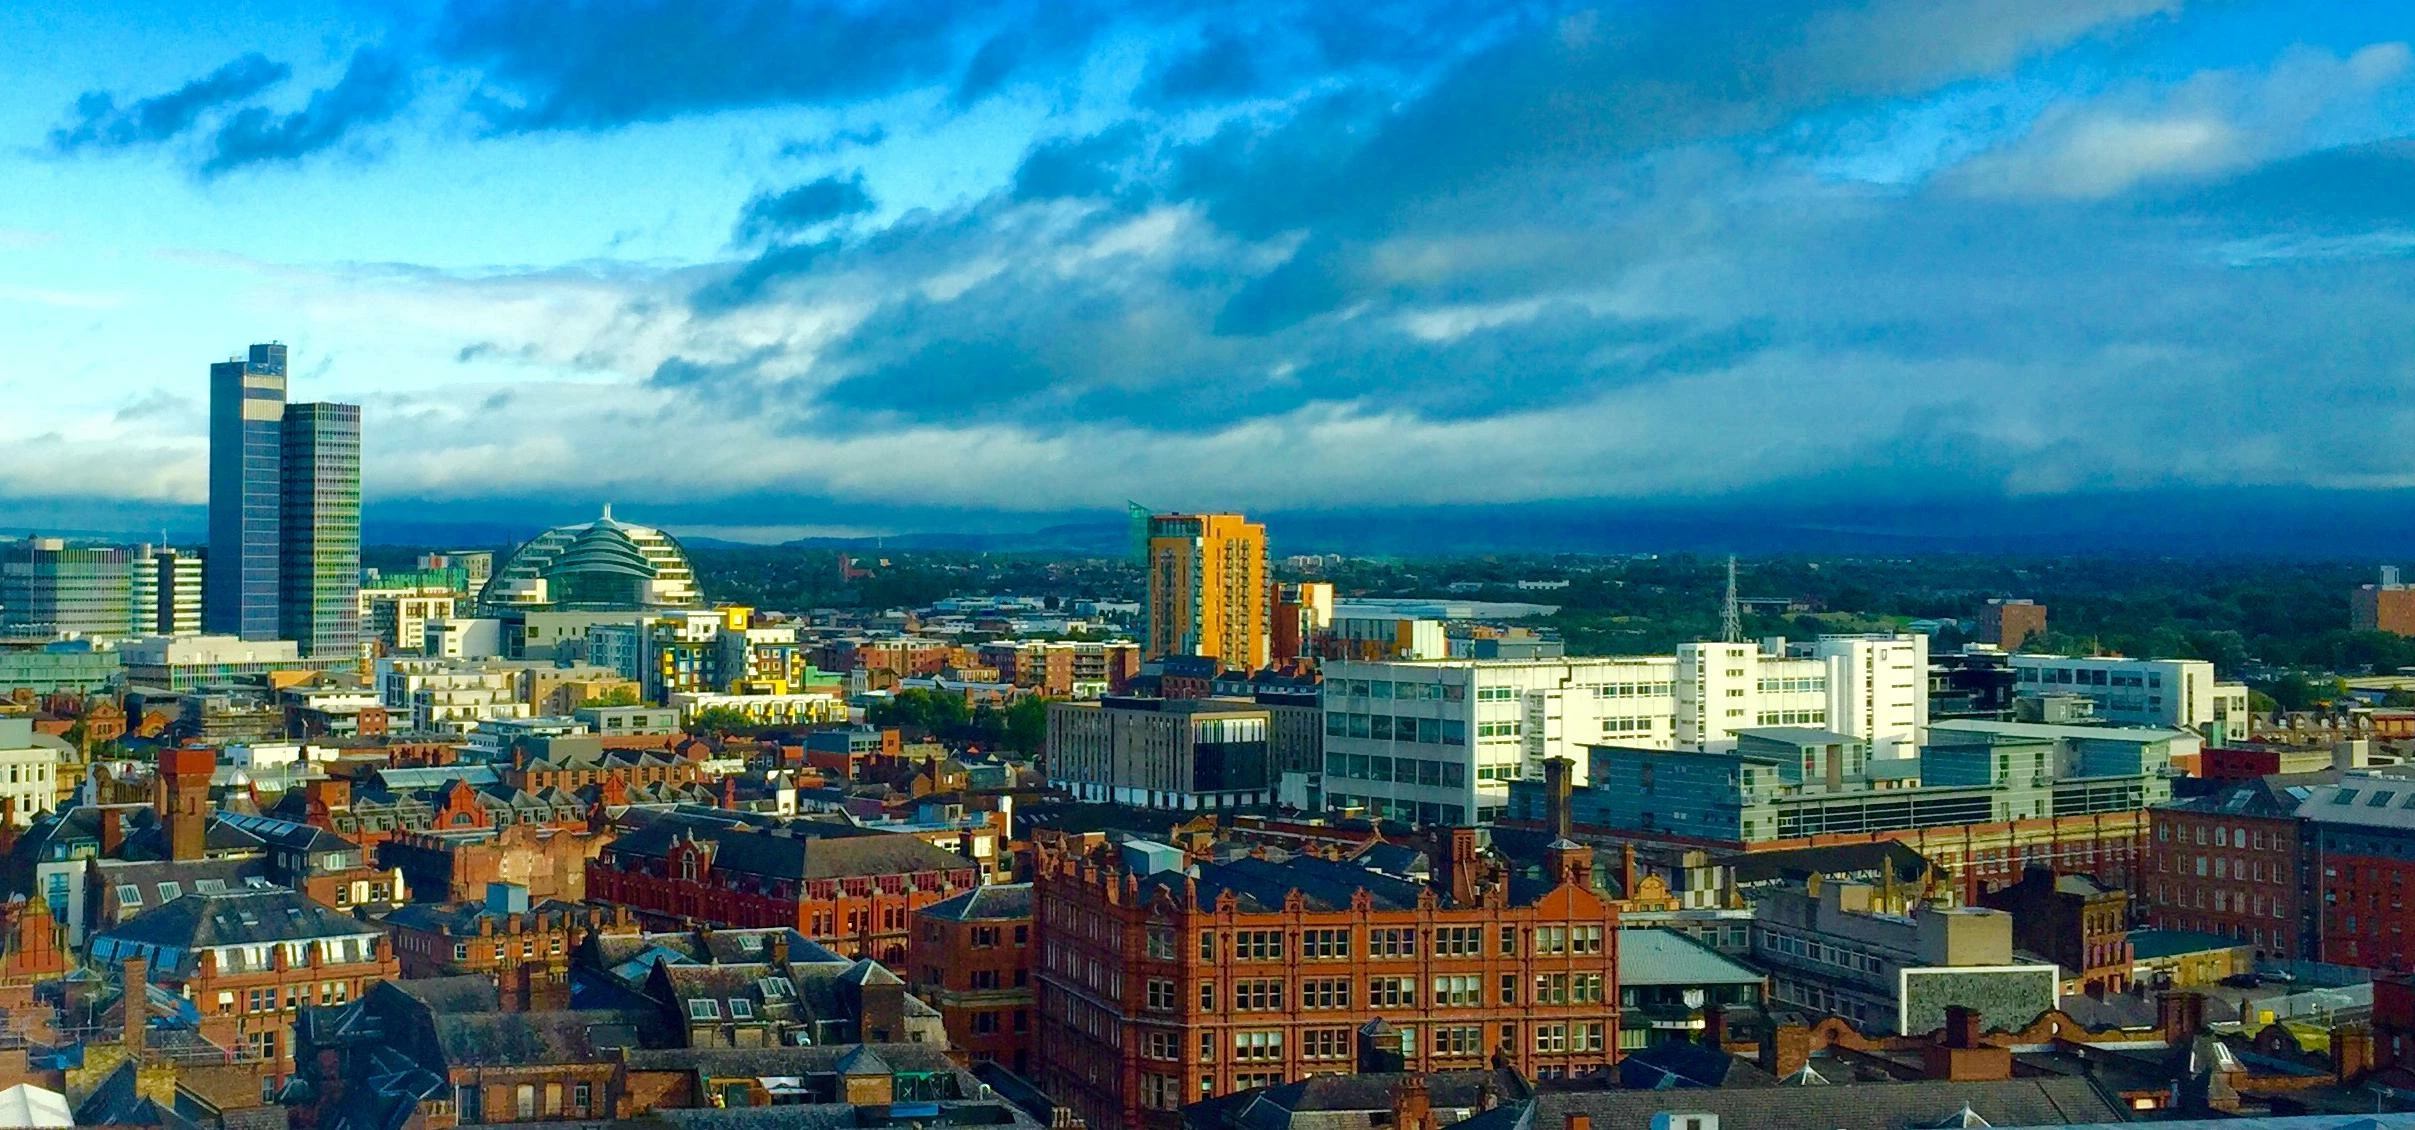 A View of the Manchester Skyline from 111 Piccadilly, Manchester.